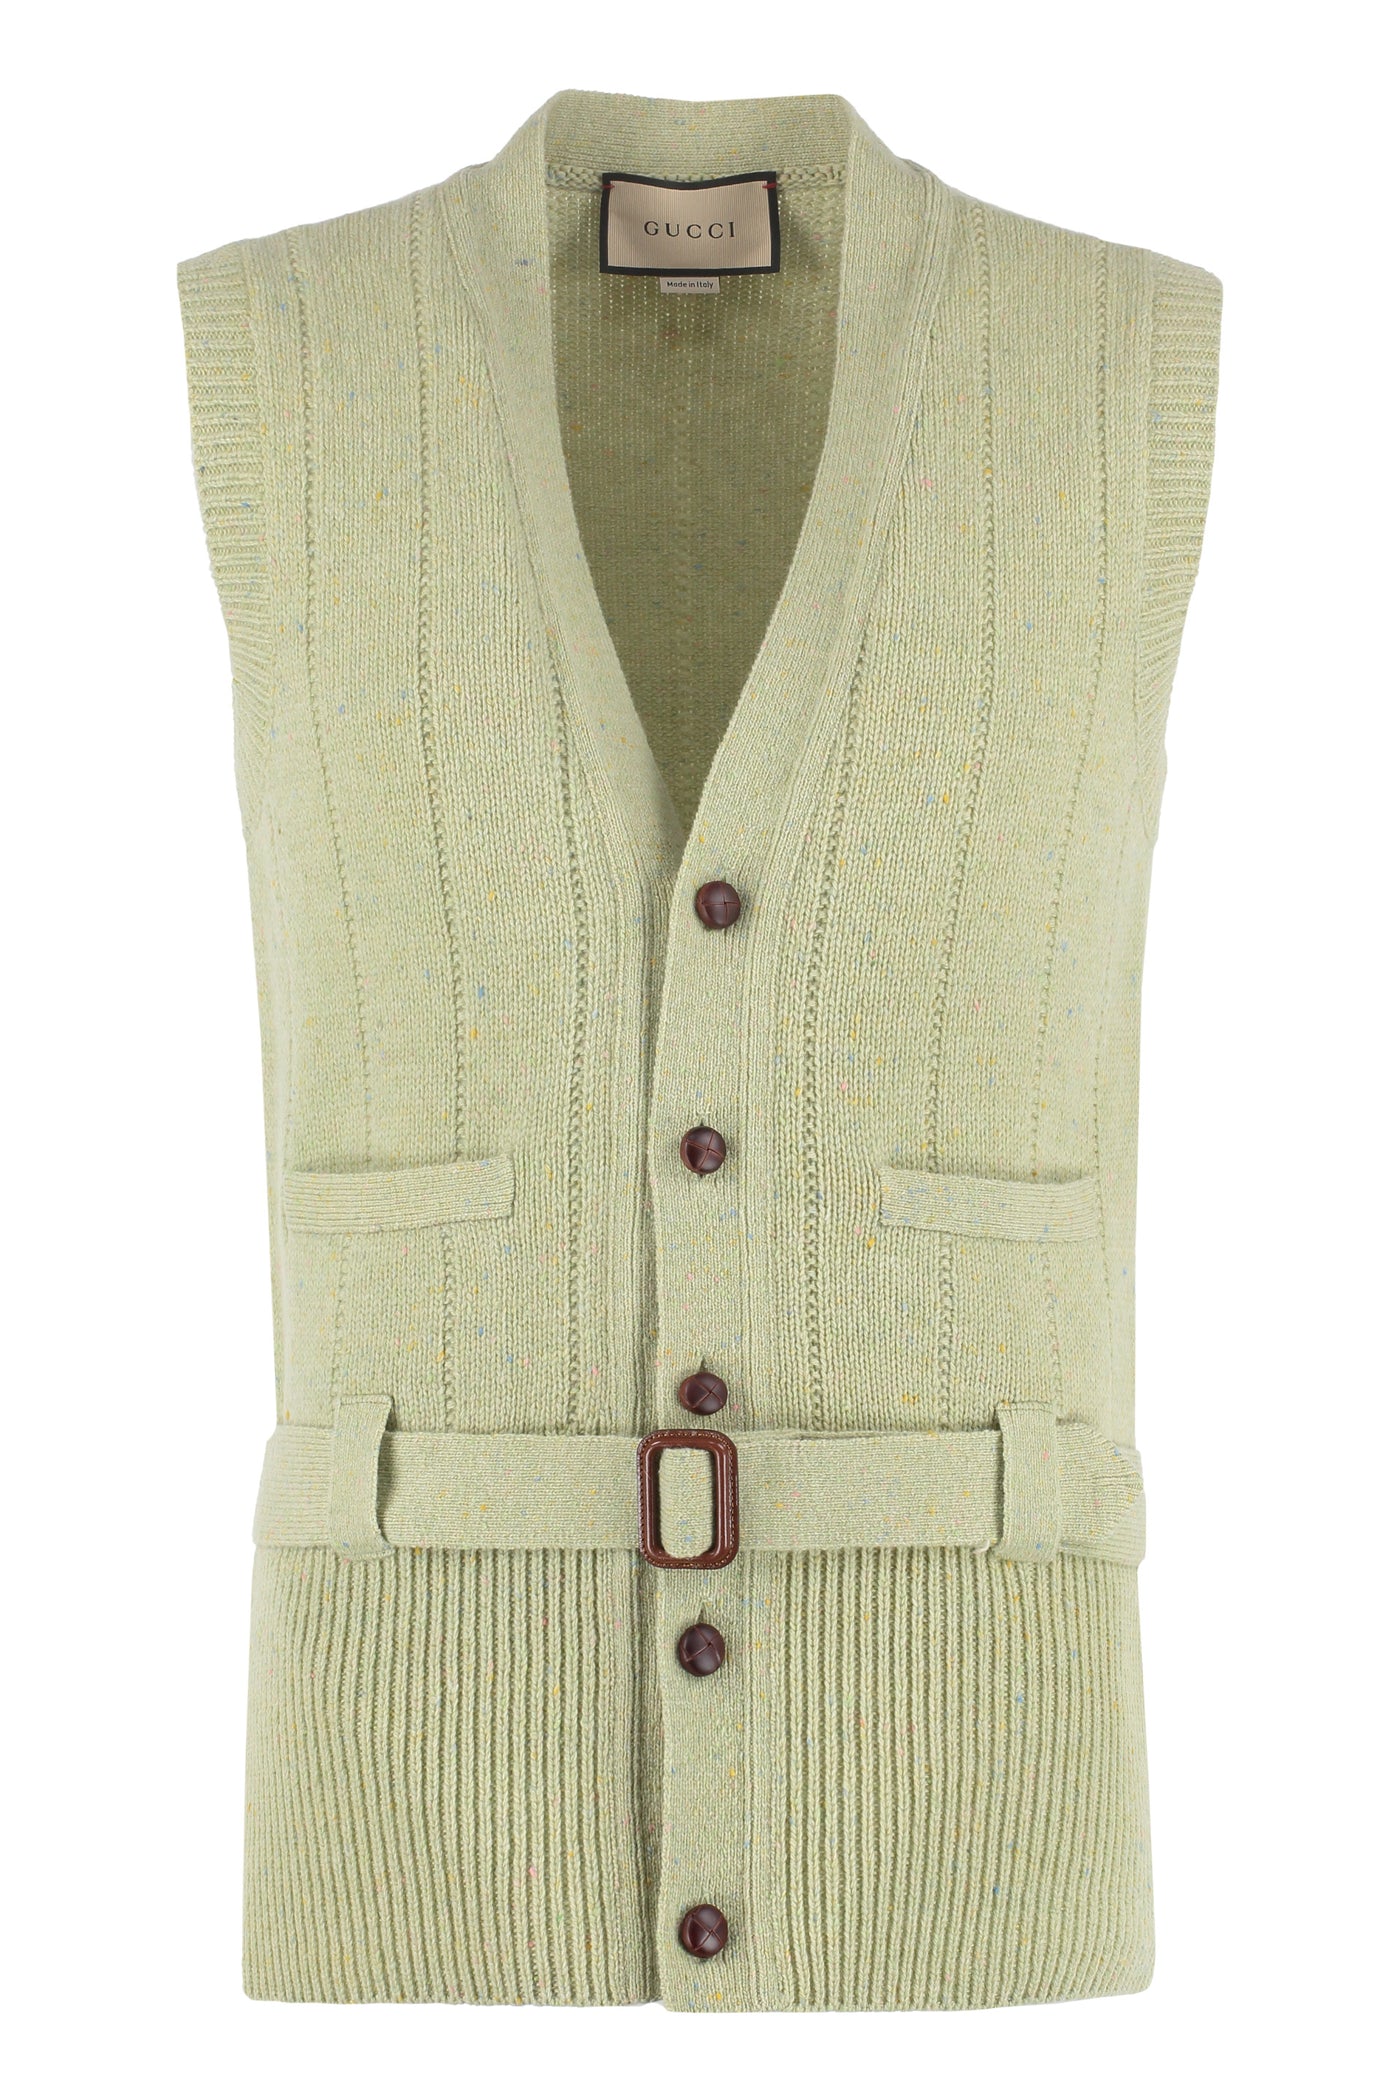 3222 GUCCI KNITTED WOOL VEST